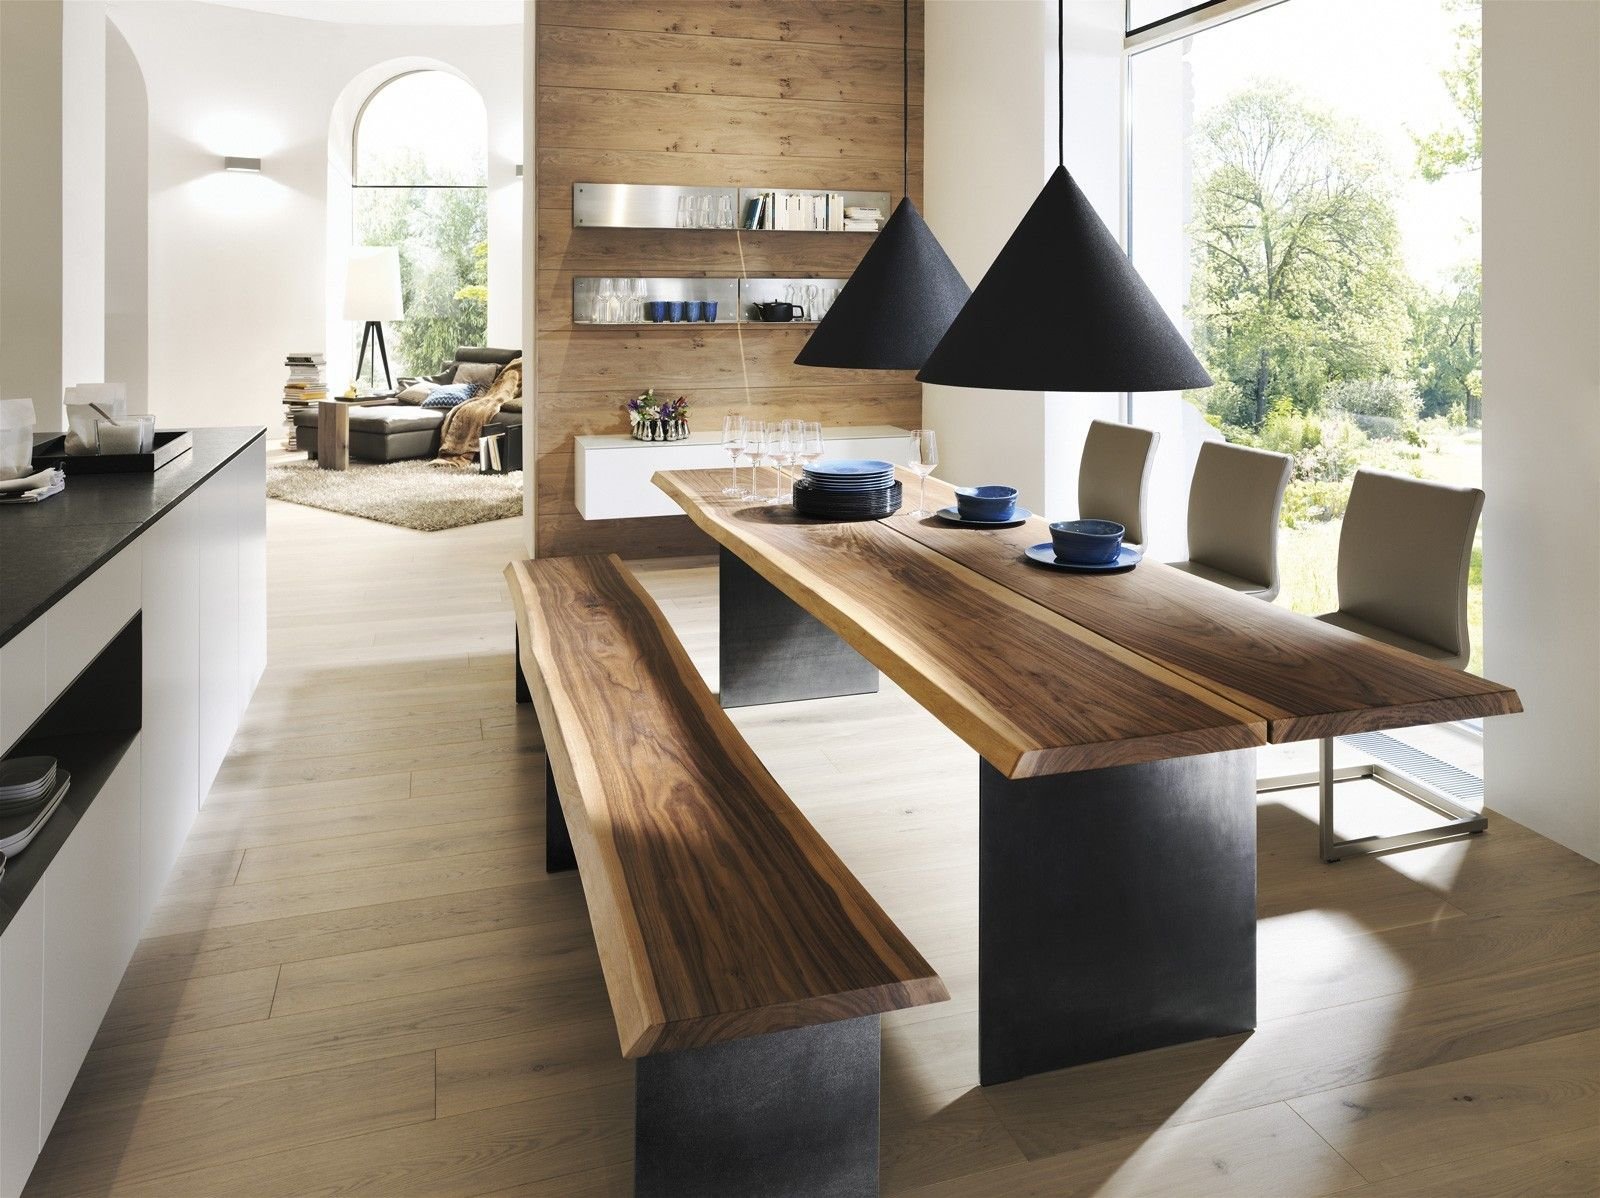 Stylishly designed dining rooms are very trendy